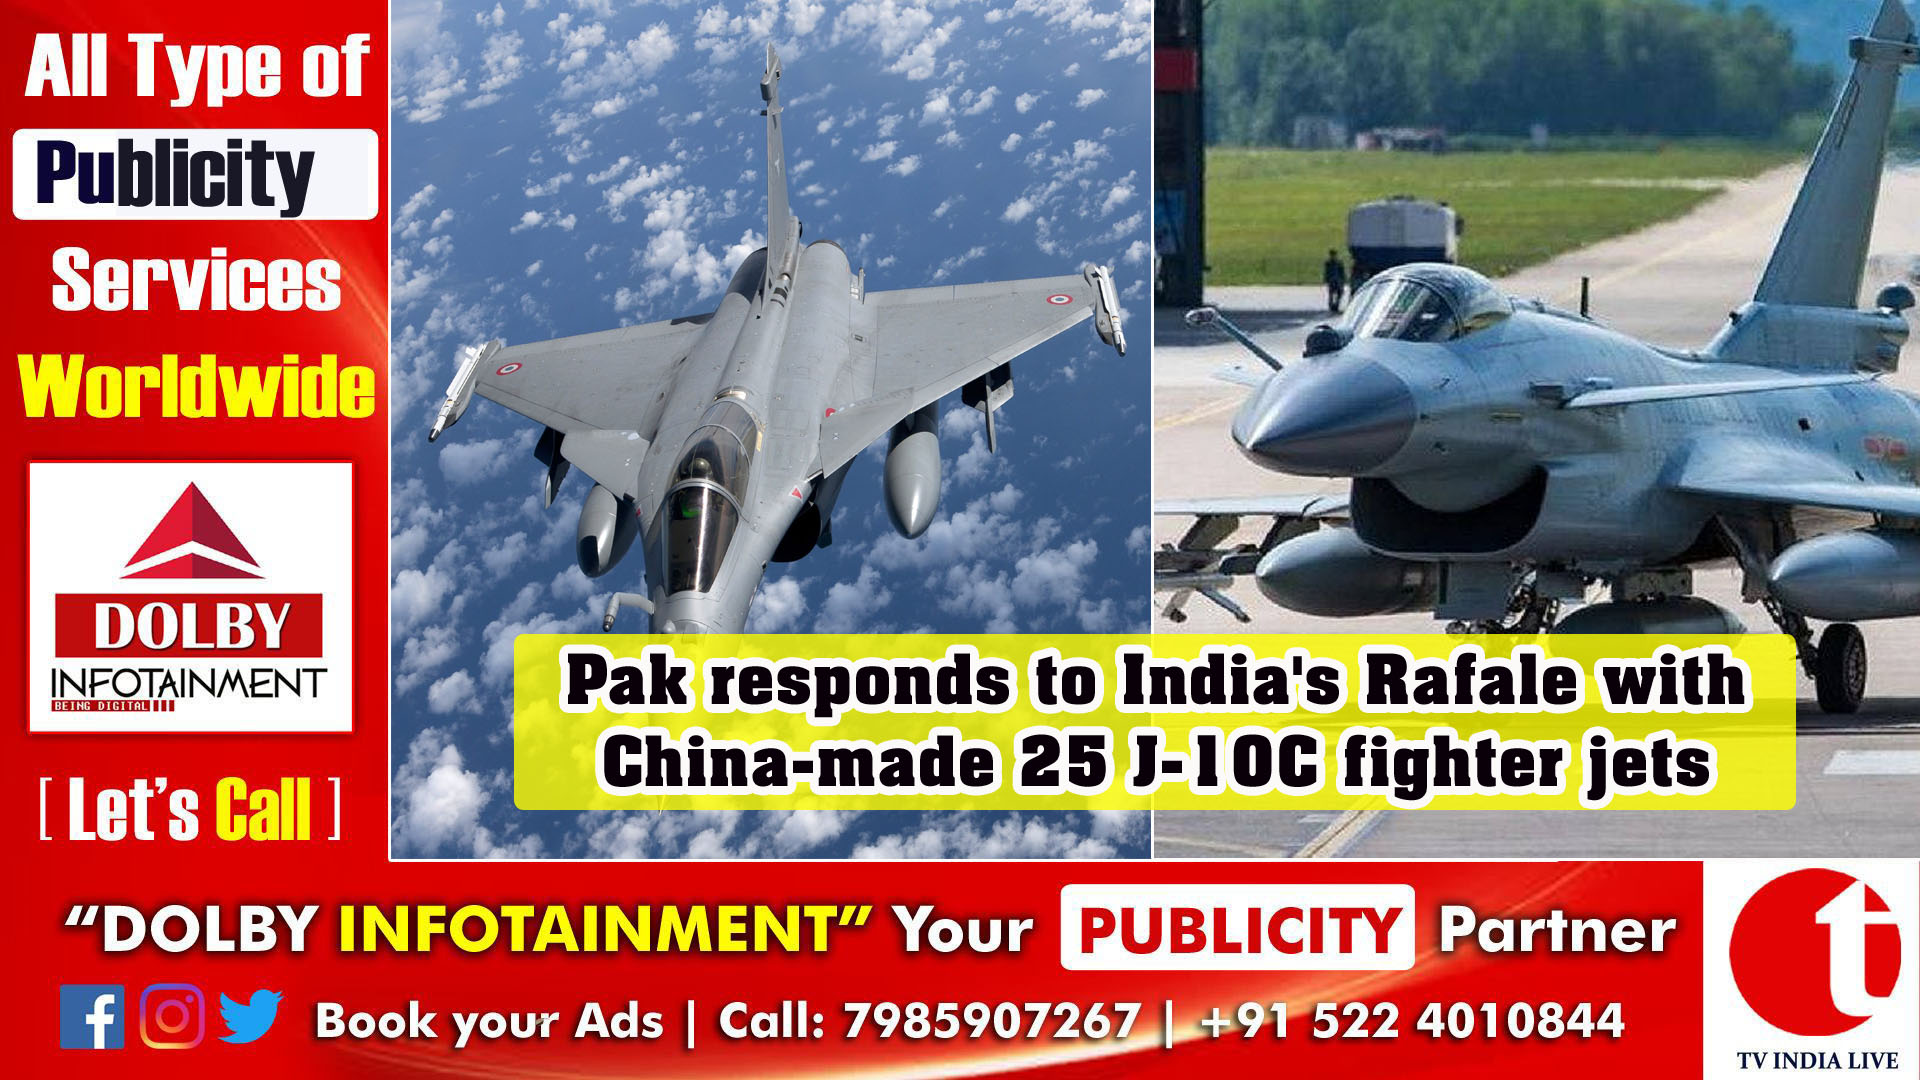 Pak responds to India's Rafale with China-made 25 J-10C fighter jets